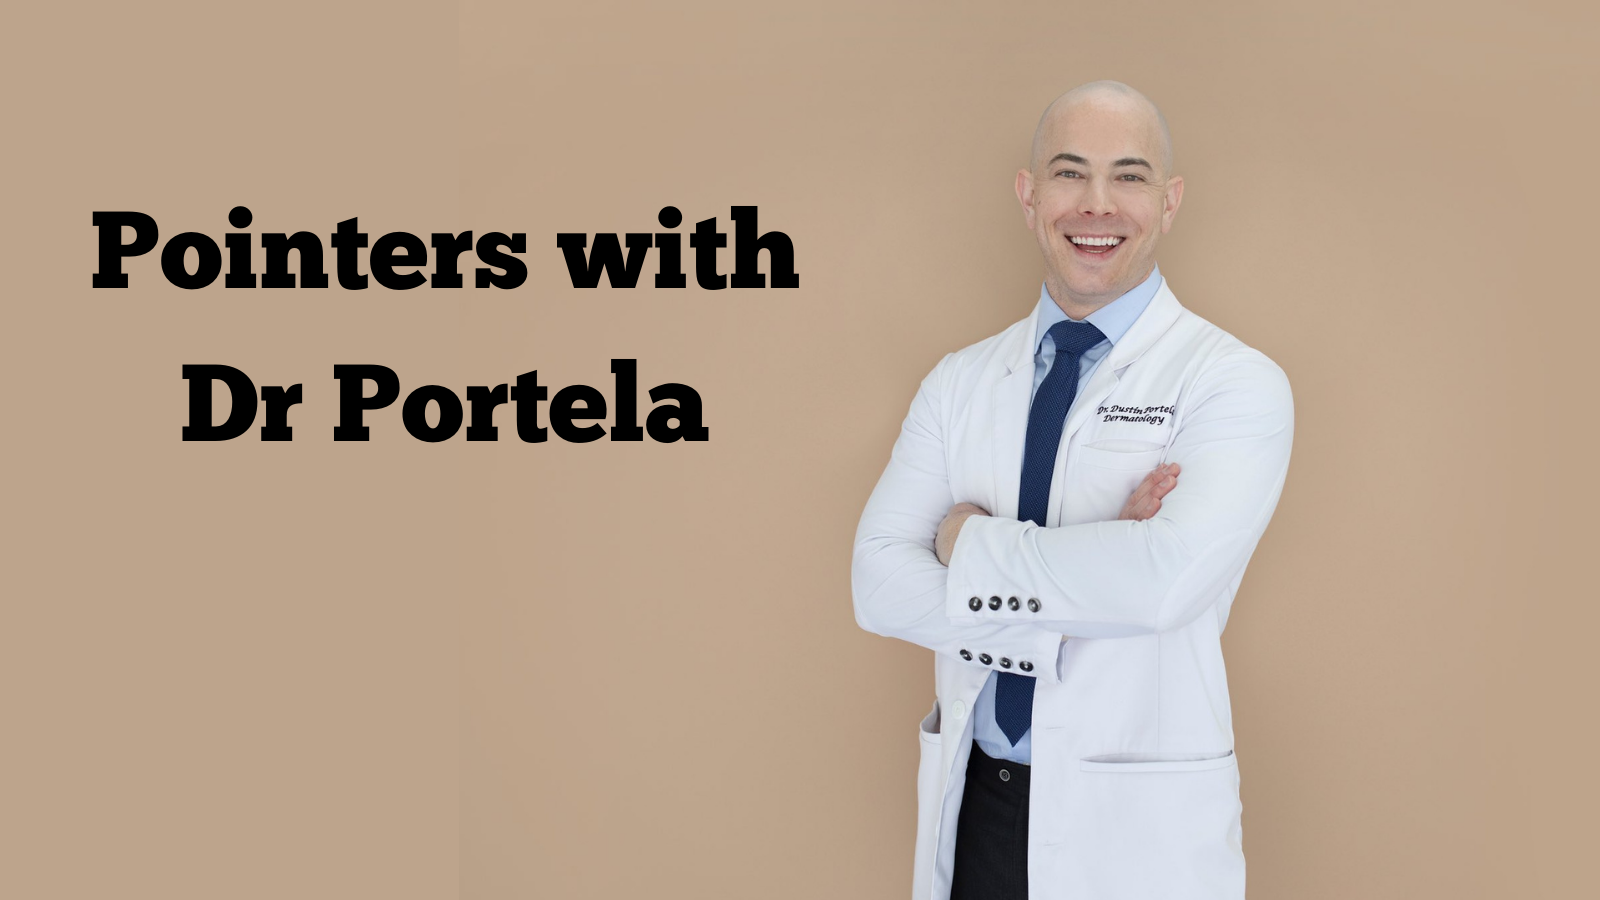 Pointers With Dr Portela: How to Improve Wrinkles 